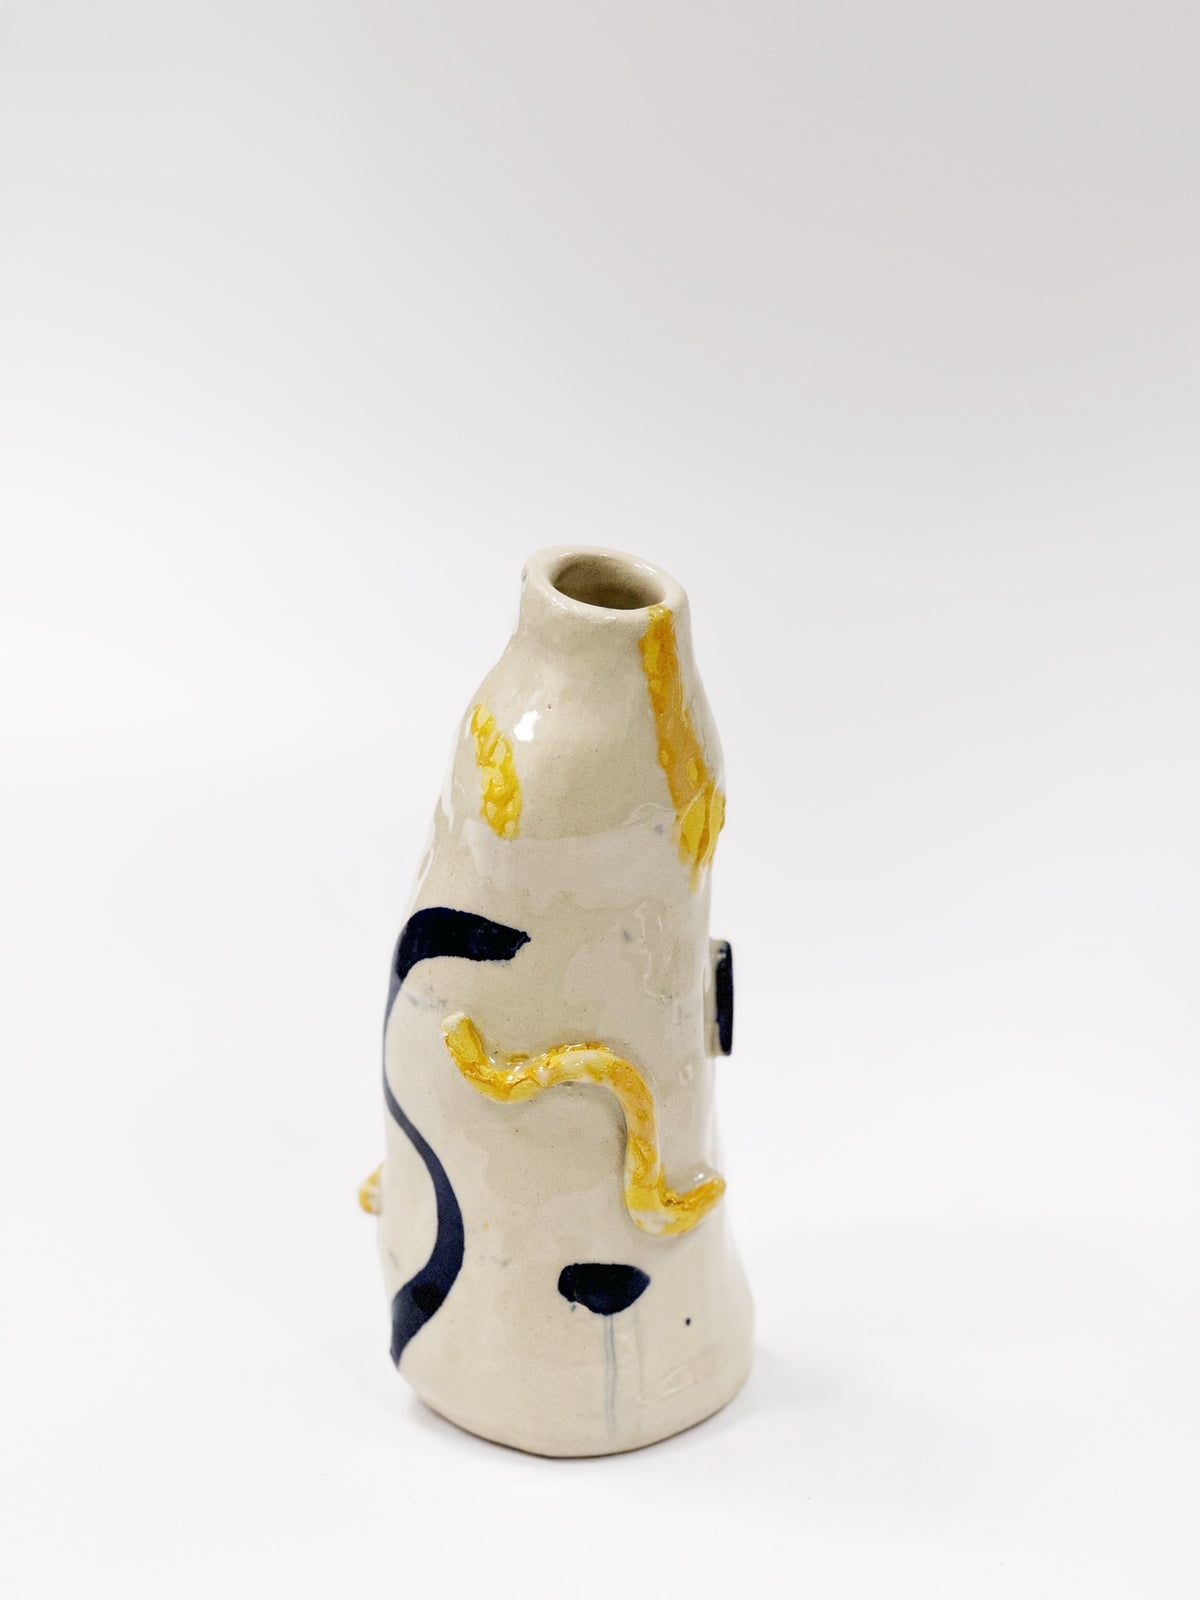 Ceramic vase with a blue and yellow pattern